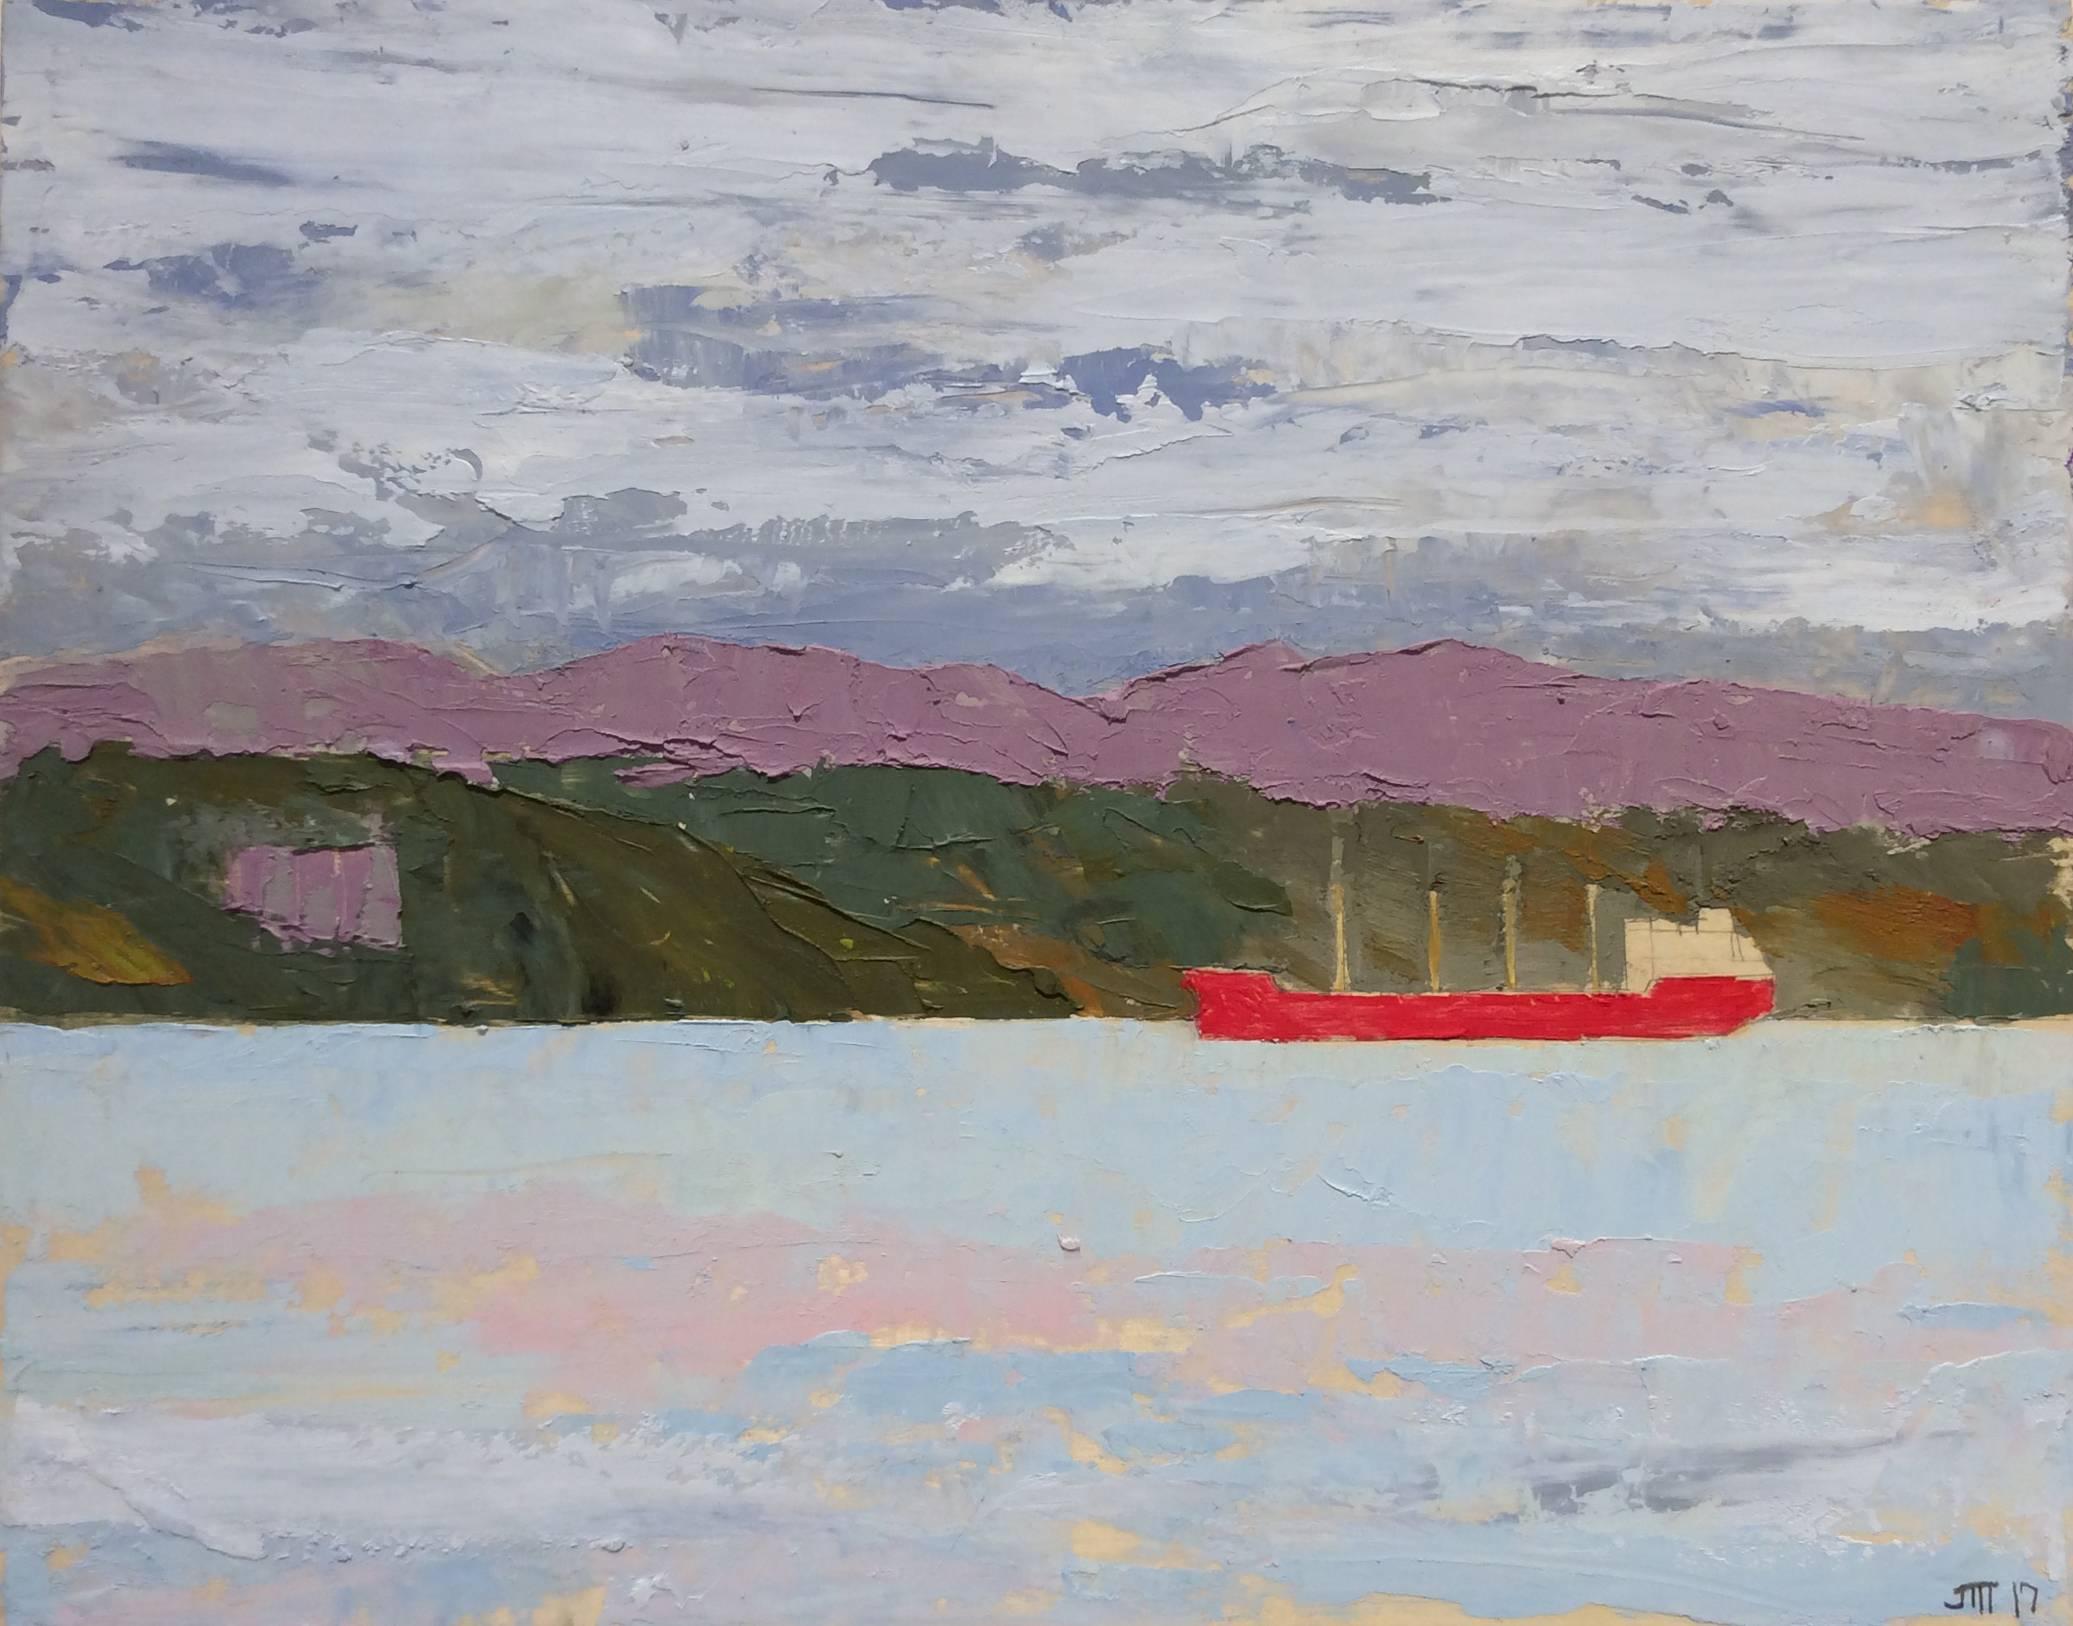 Nautical themed landscape of a red barge on the Hudson River 
11 x 14 inches unframed
oil on wood panel

This modern, impressionistic style landscape oil painting on wood panel of a barge on the Hudson River was painted by Rhinecliff, NY-based